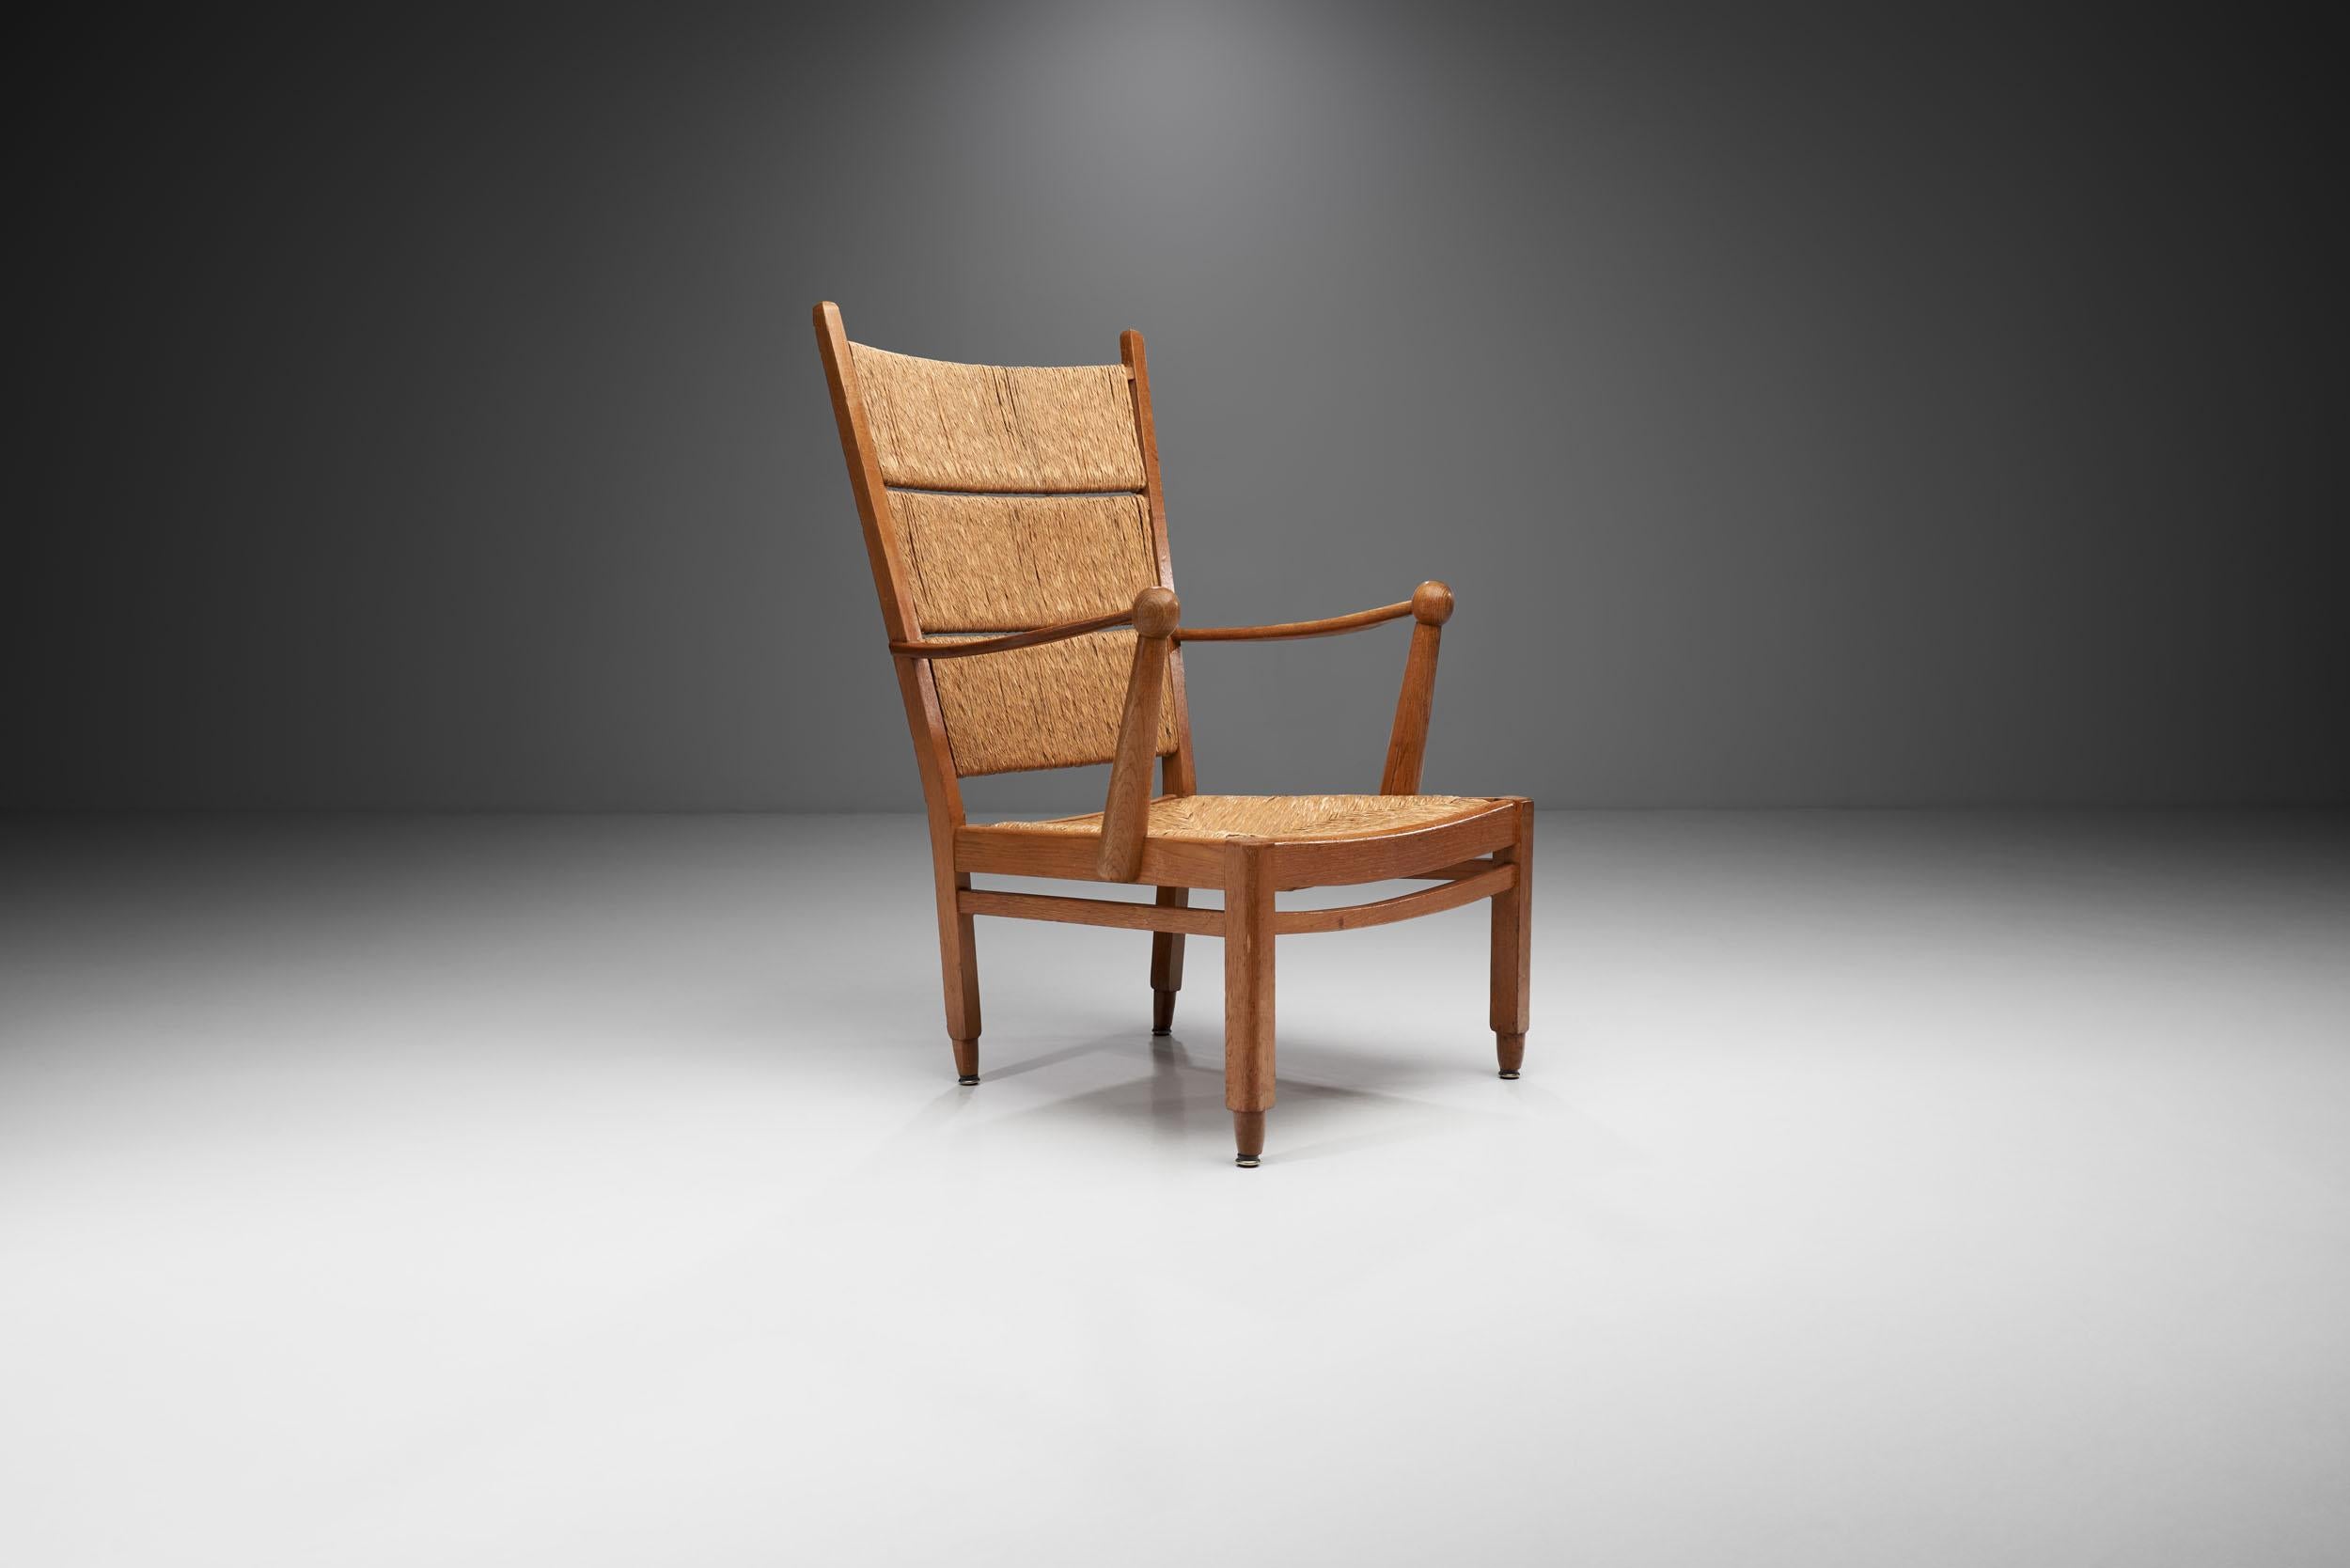 This whimsical armchair in solid oak and straw is commonly attributed to Dutch designer Bas Van Pelt. The construction of this rare early 1940s design is simple at its core, but thanks to the details, it is a playful representation of early Dutch